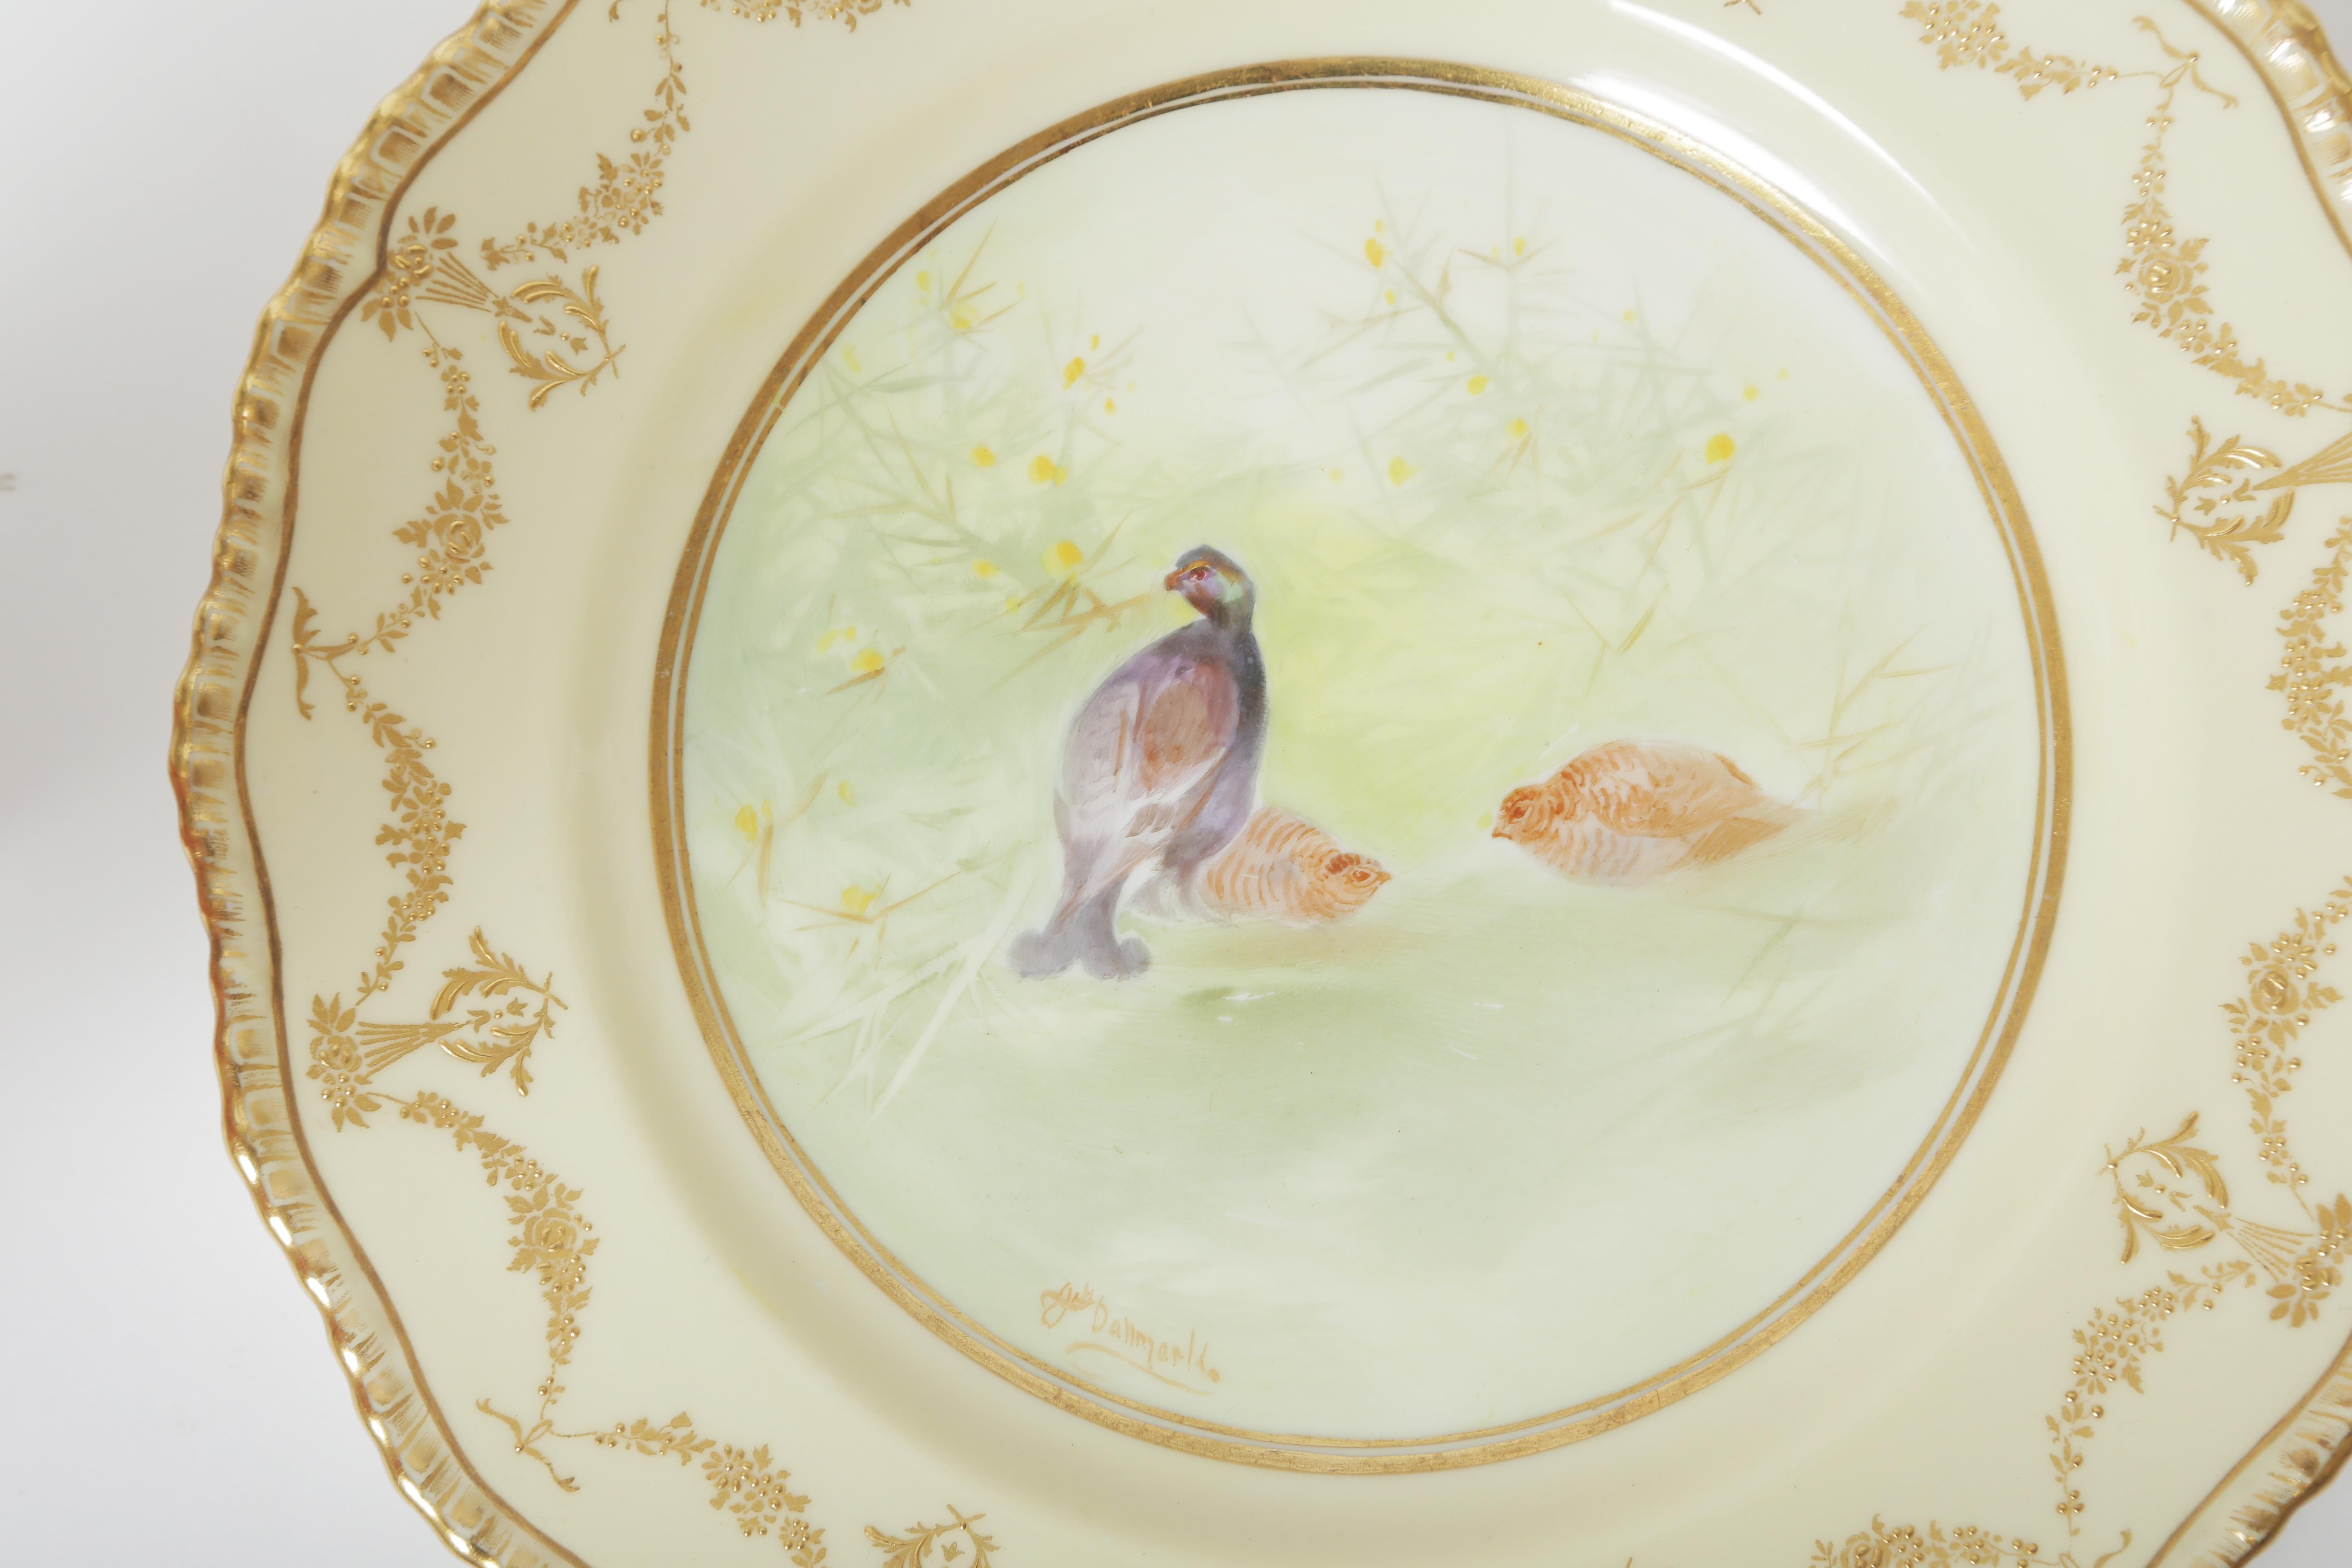 Ten Hand Painted Game Bird Plates, Raised Gold Accents, Antique English 1